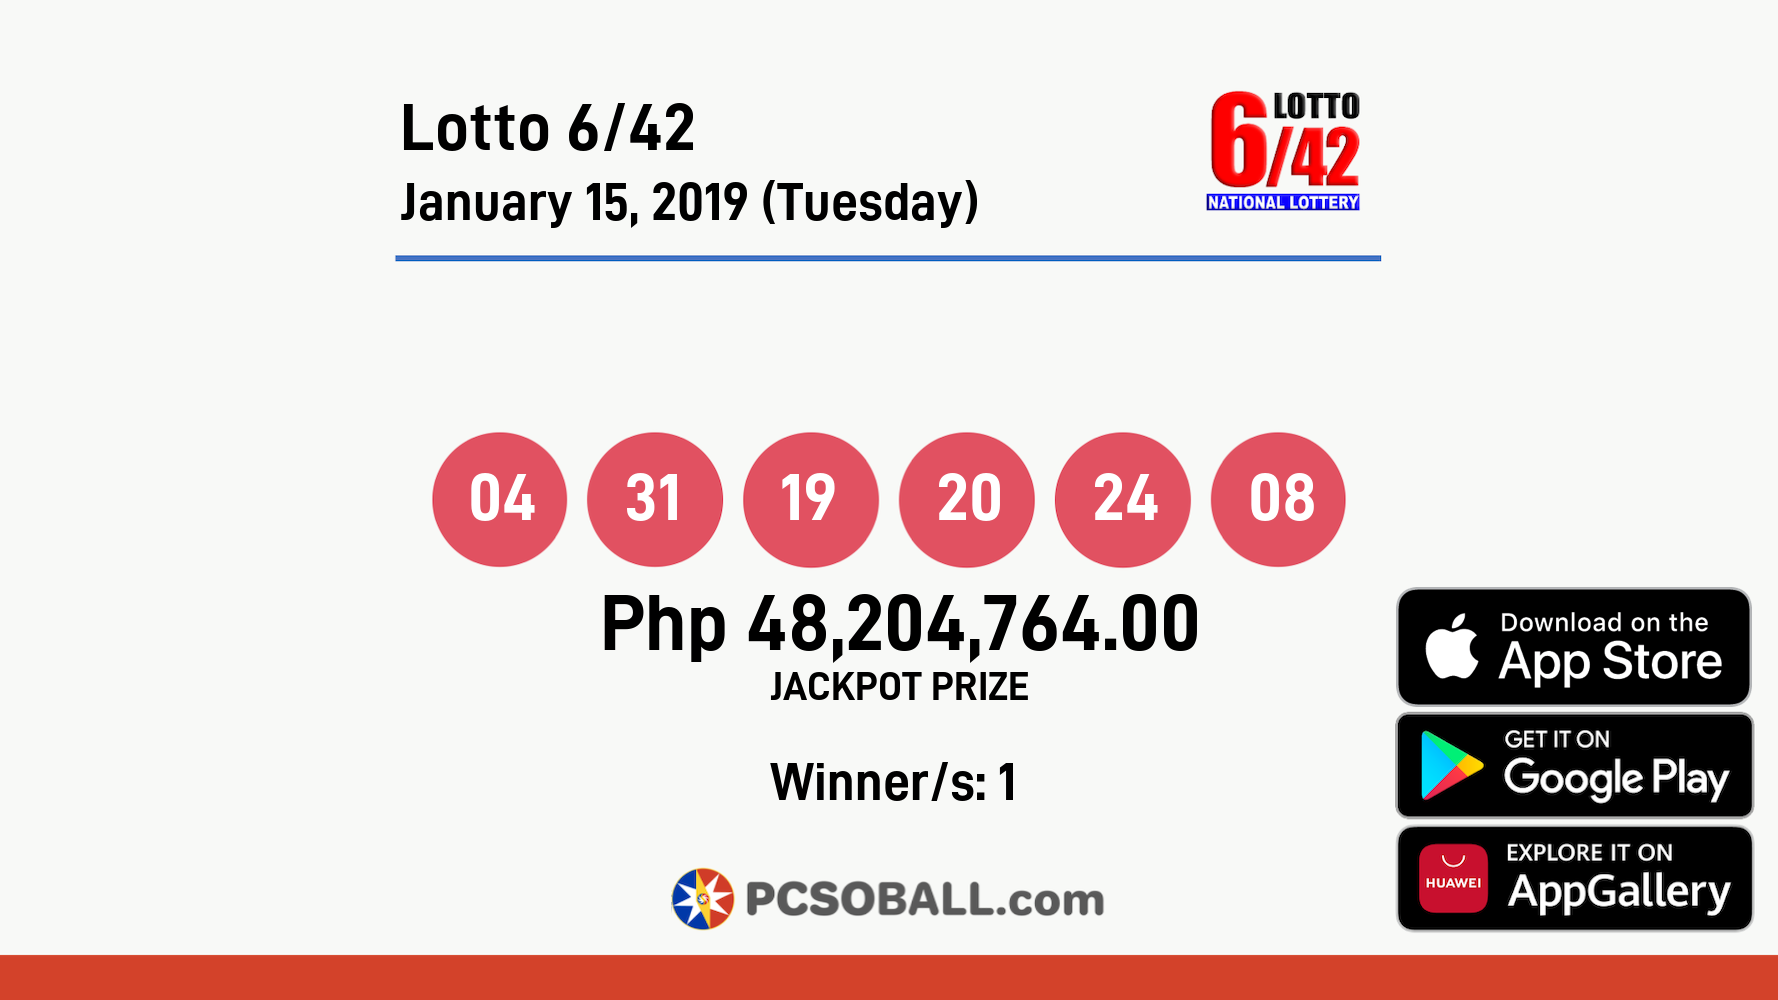 Lotto 6/42 January 15, 2019 (Tuesday) Result